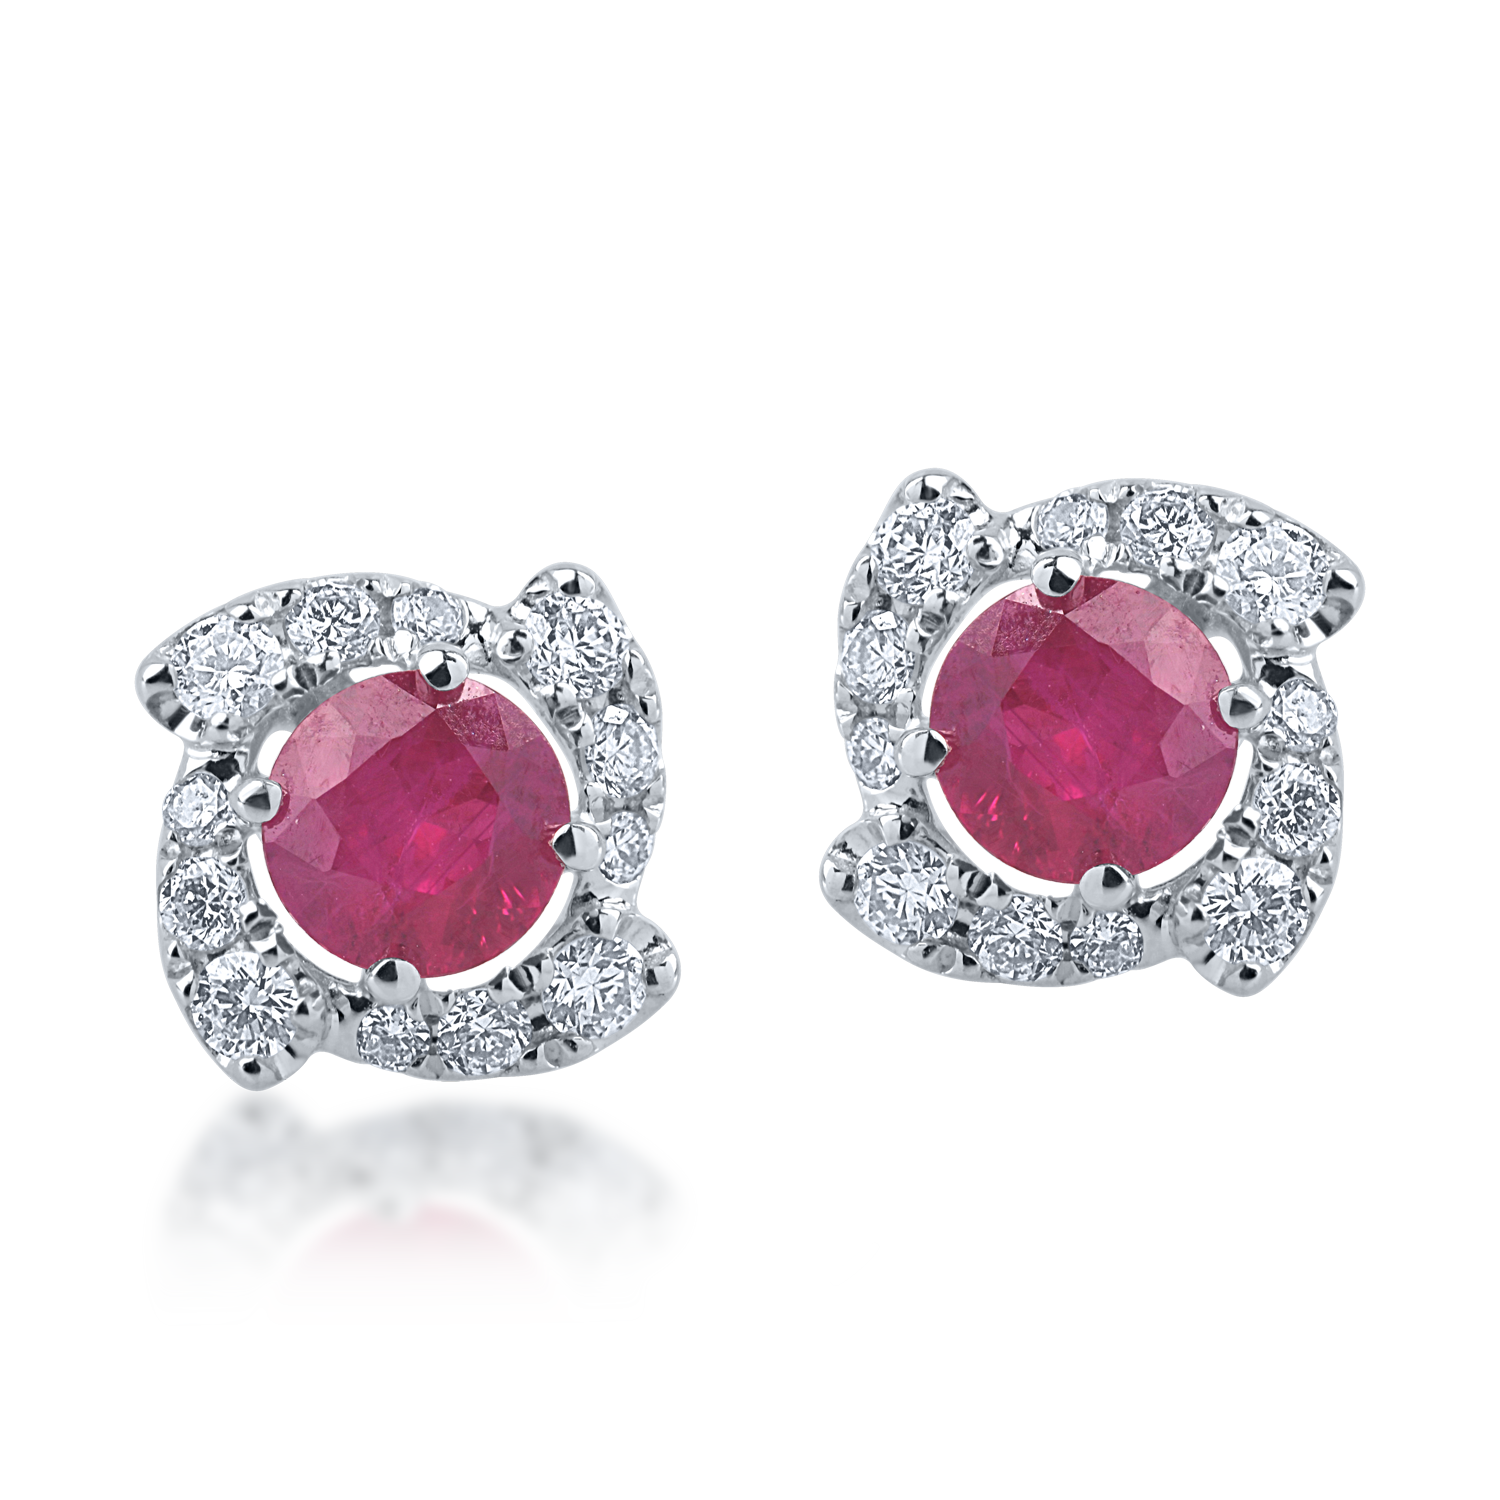 White gold earrings with 0.46ct rubies and 0.17ct diamonds